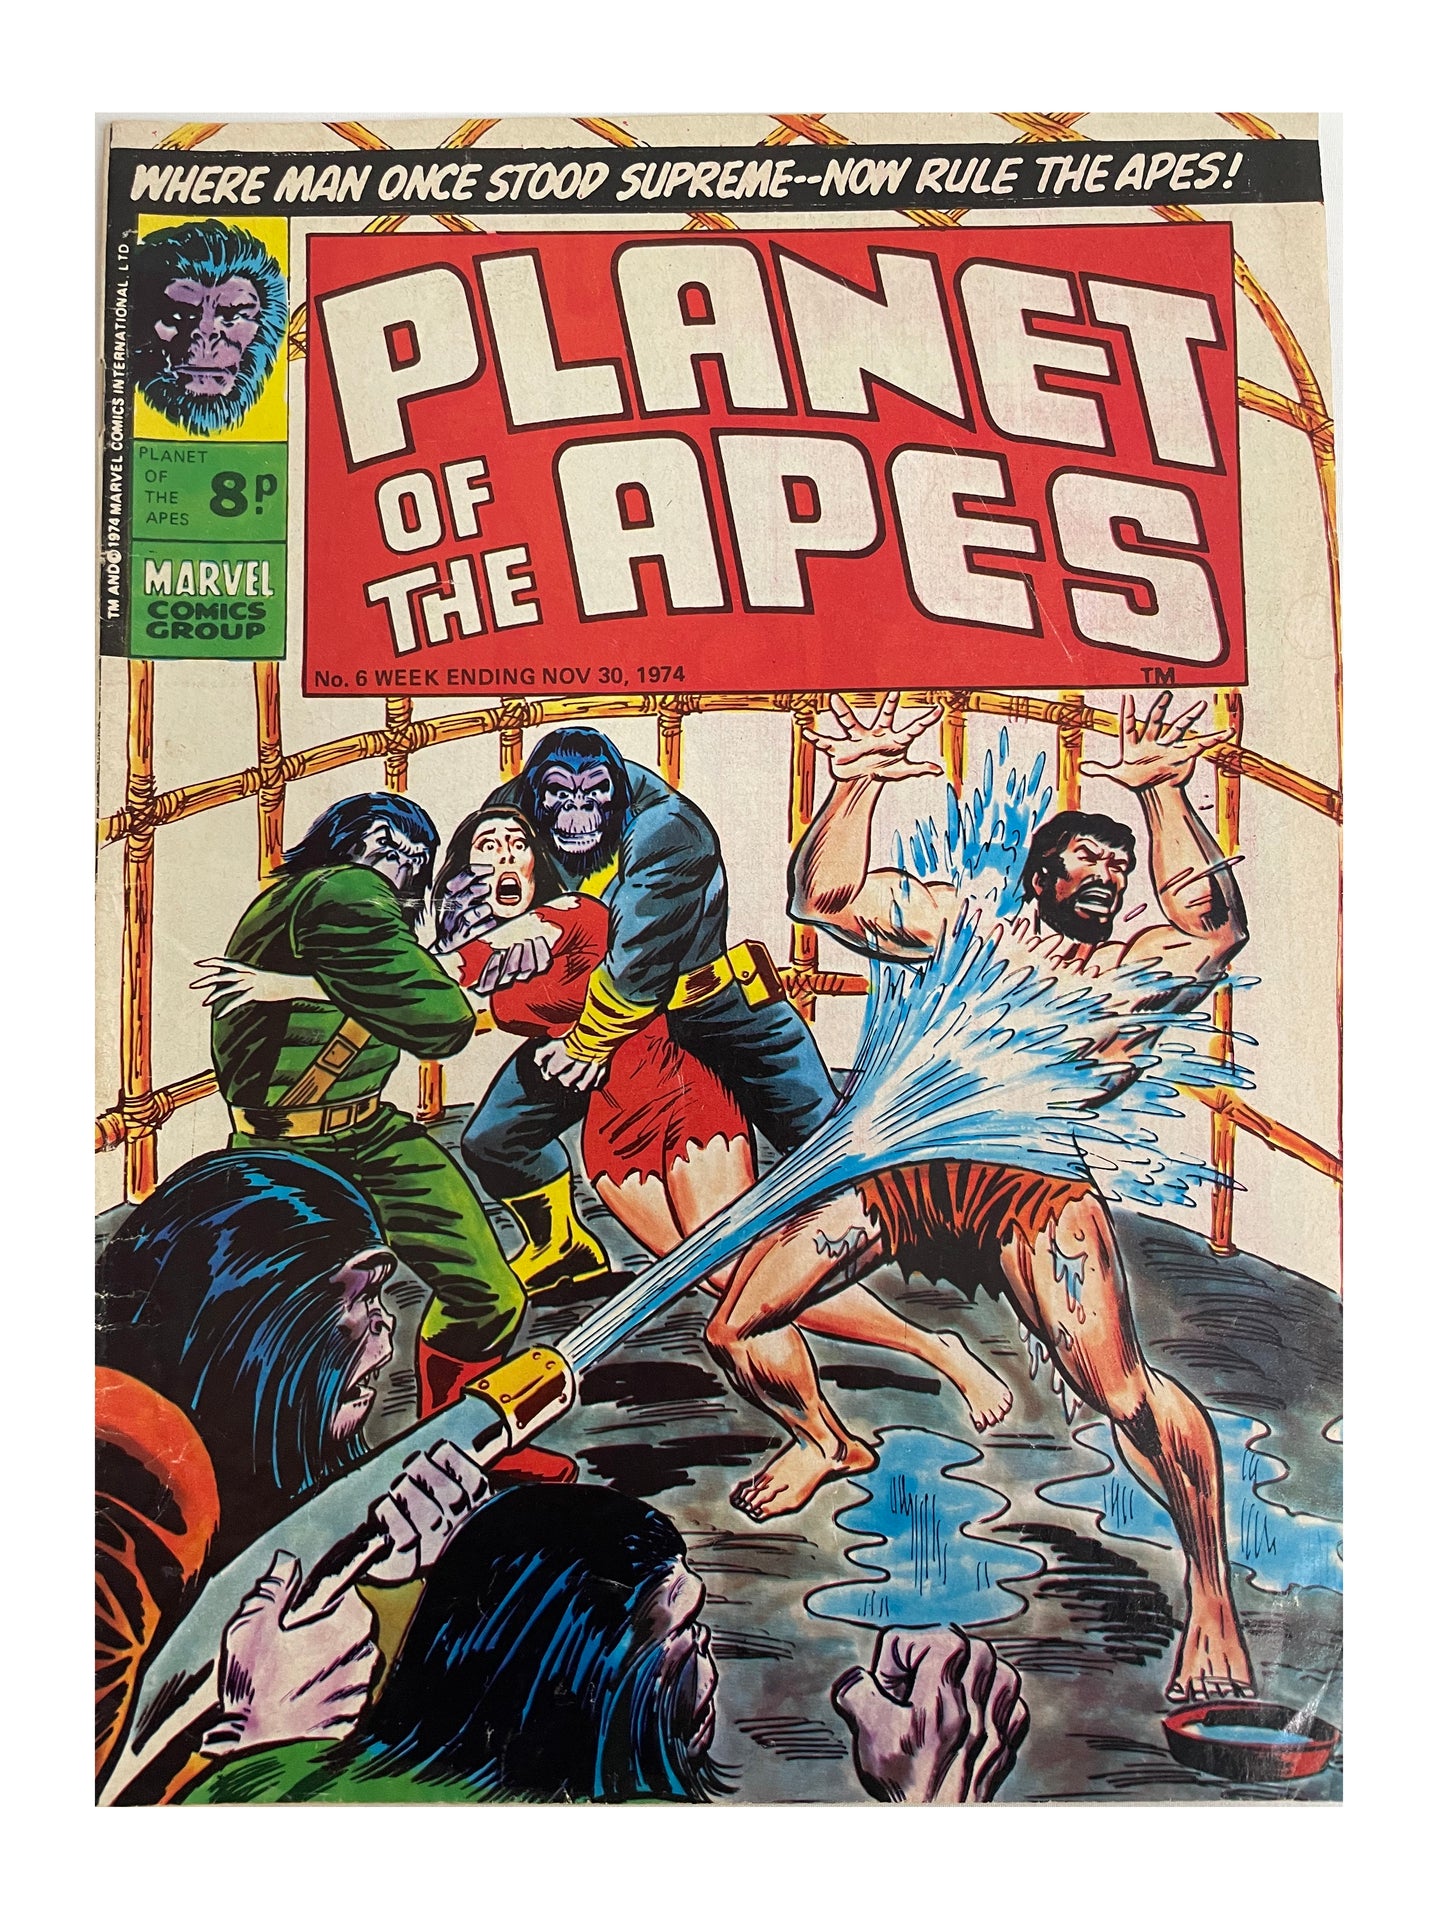 1974 Marvels Comics - Planet Of The Apes Comic Issue No. 6 - November 30th 1974